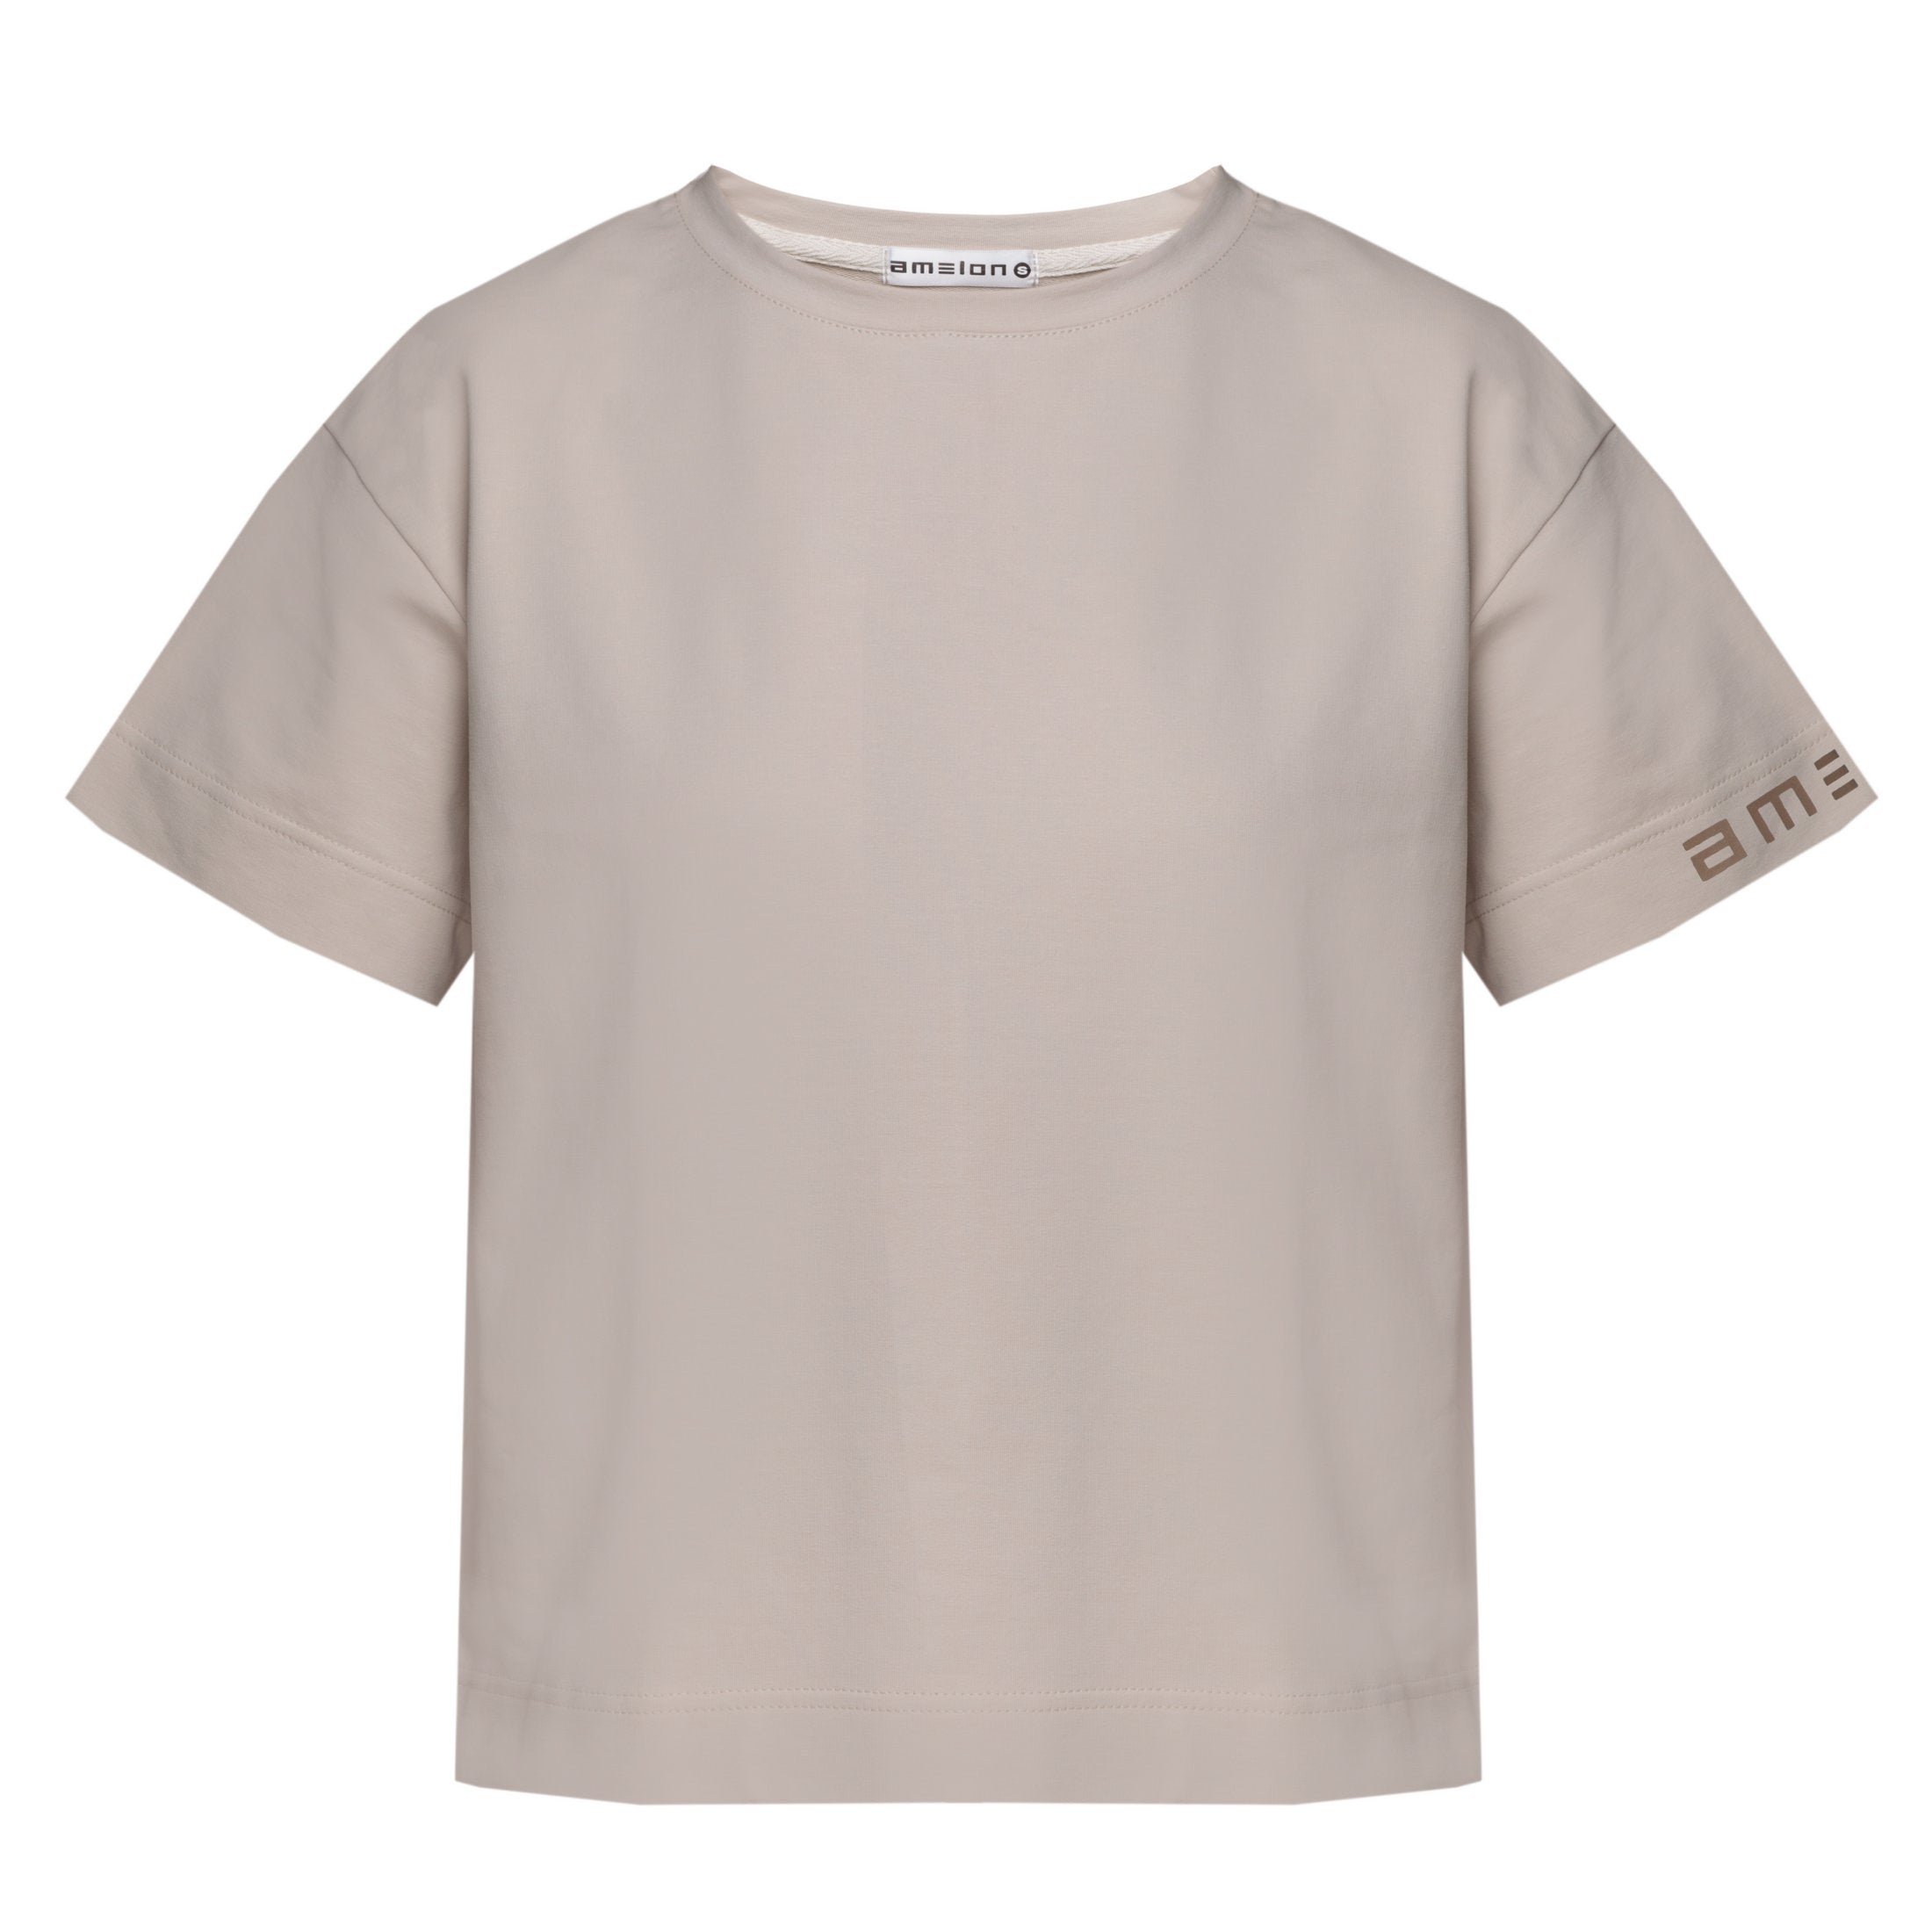 Straight women's T-shirt in milky color, logo on the sleeve